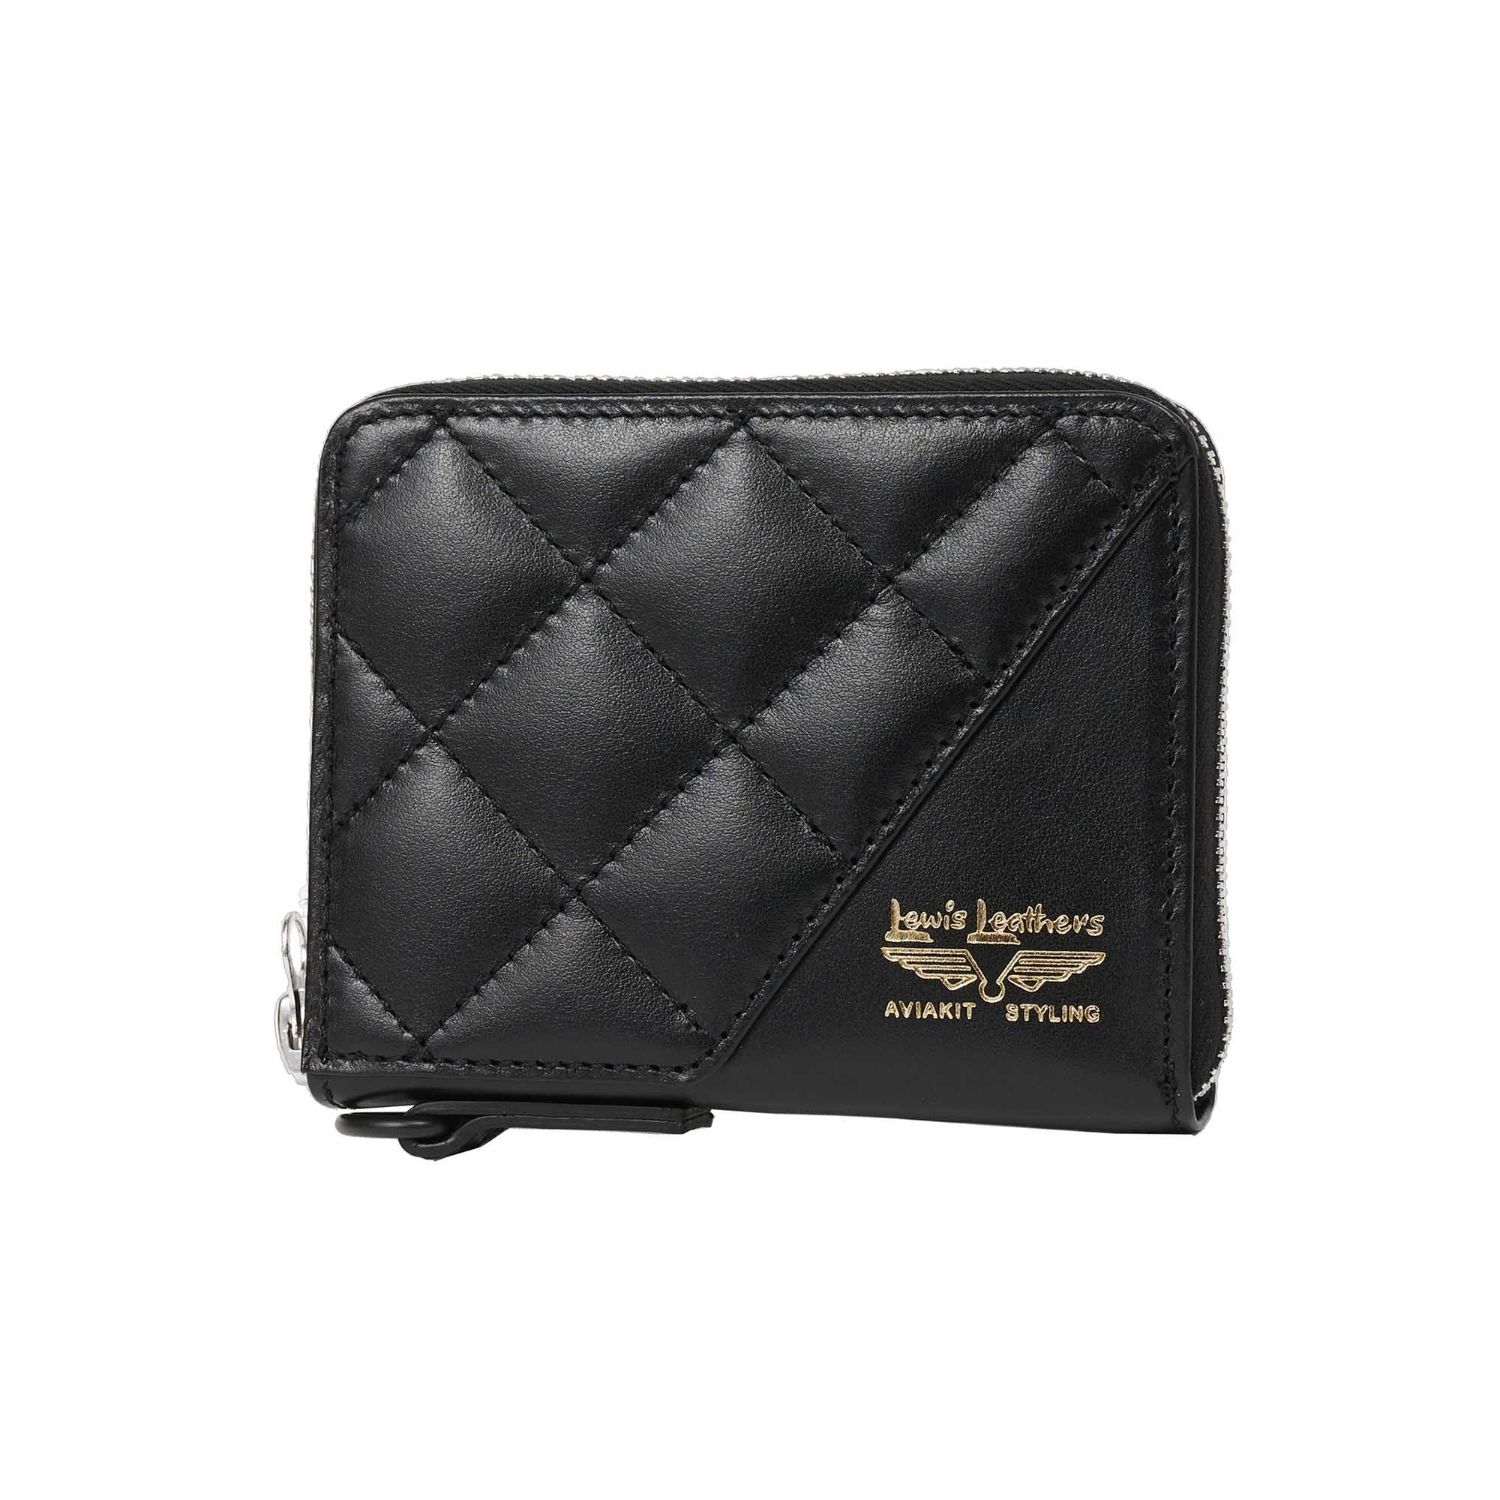 Lewis Leathers - Lewis Leathers × PORTER WALLET (商品代金に送料880